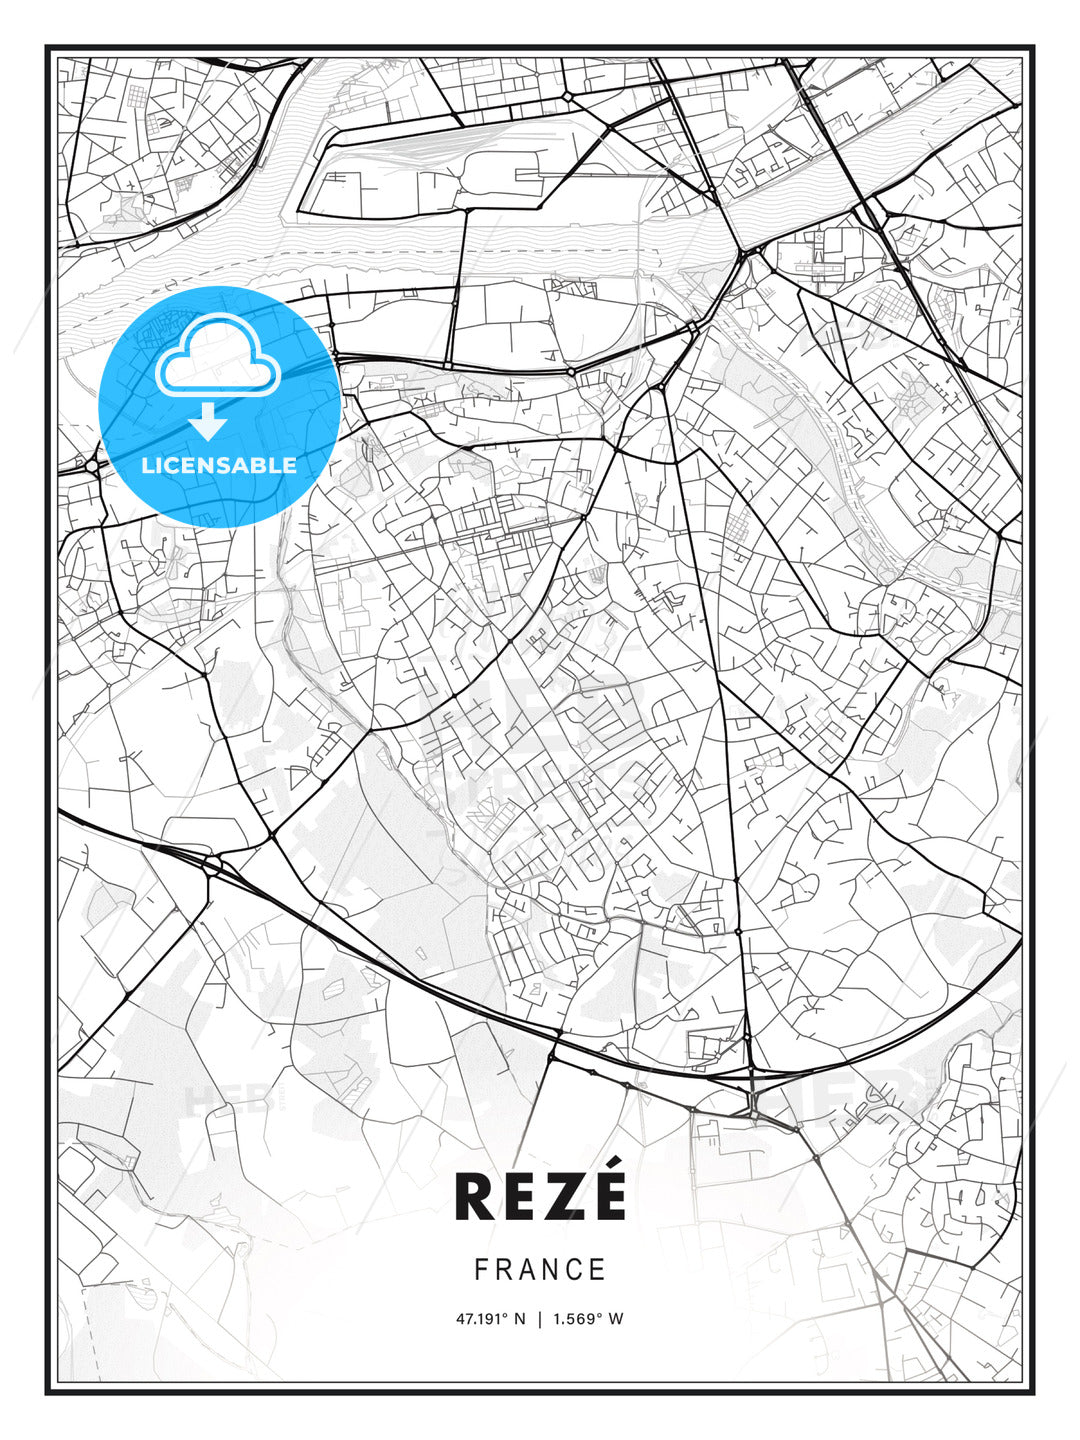 Rezé, France, Modern Print Template in Various Formats - HEBSTREITS Sketches